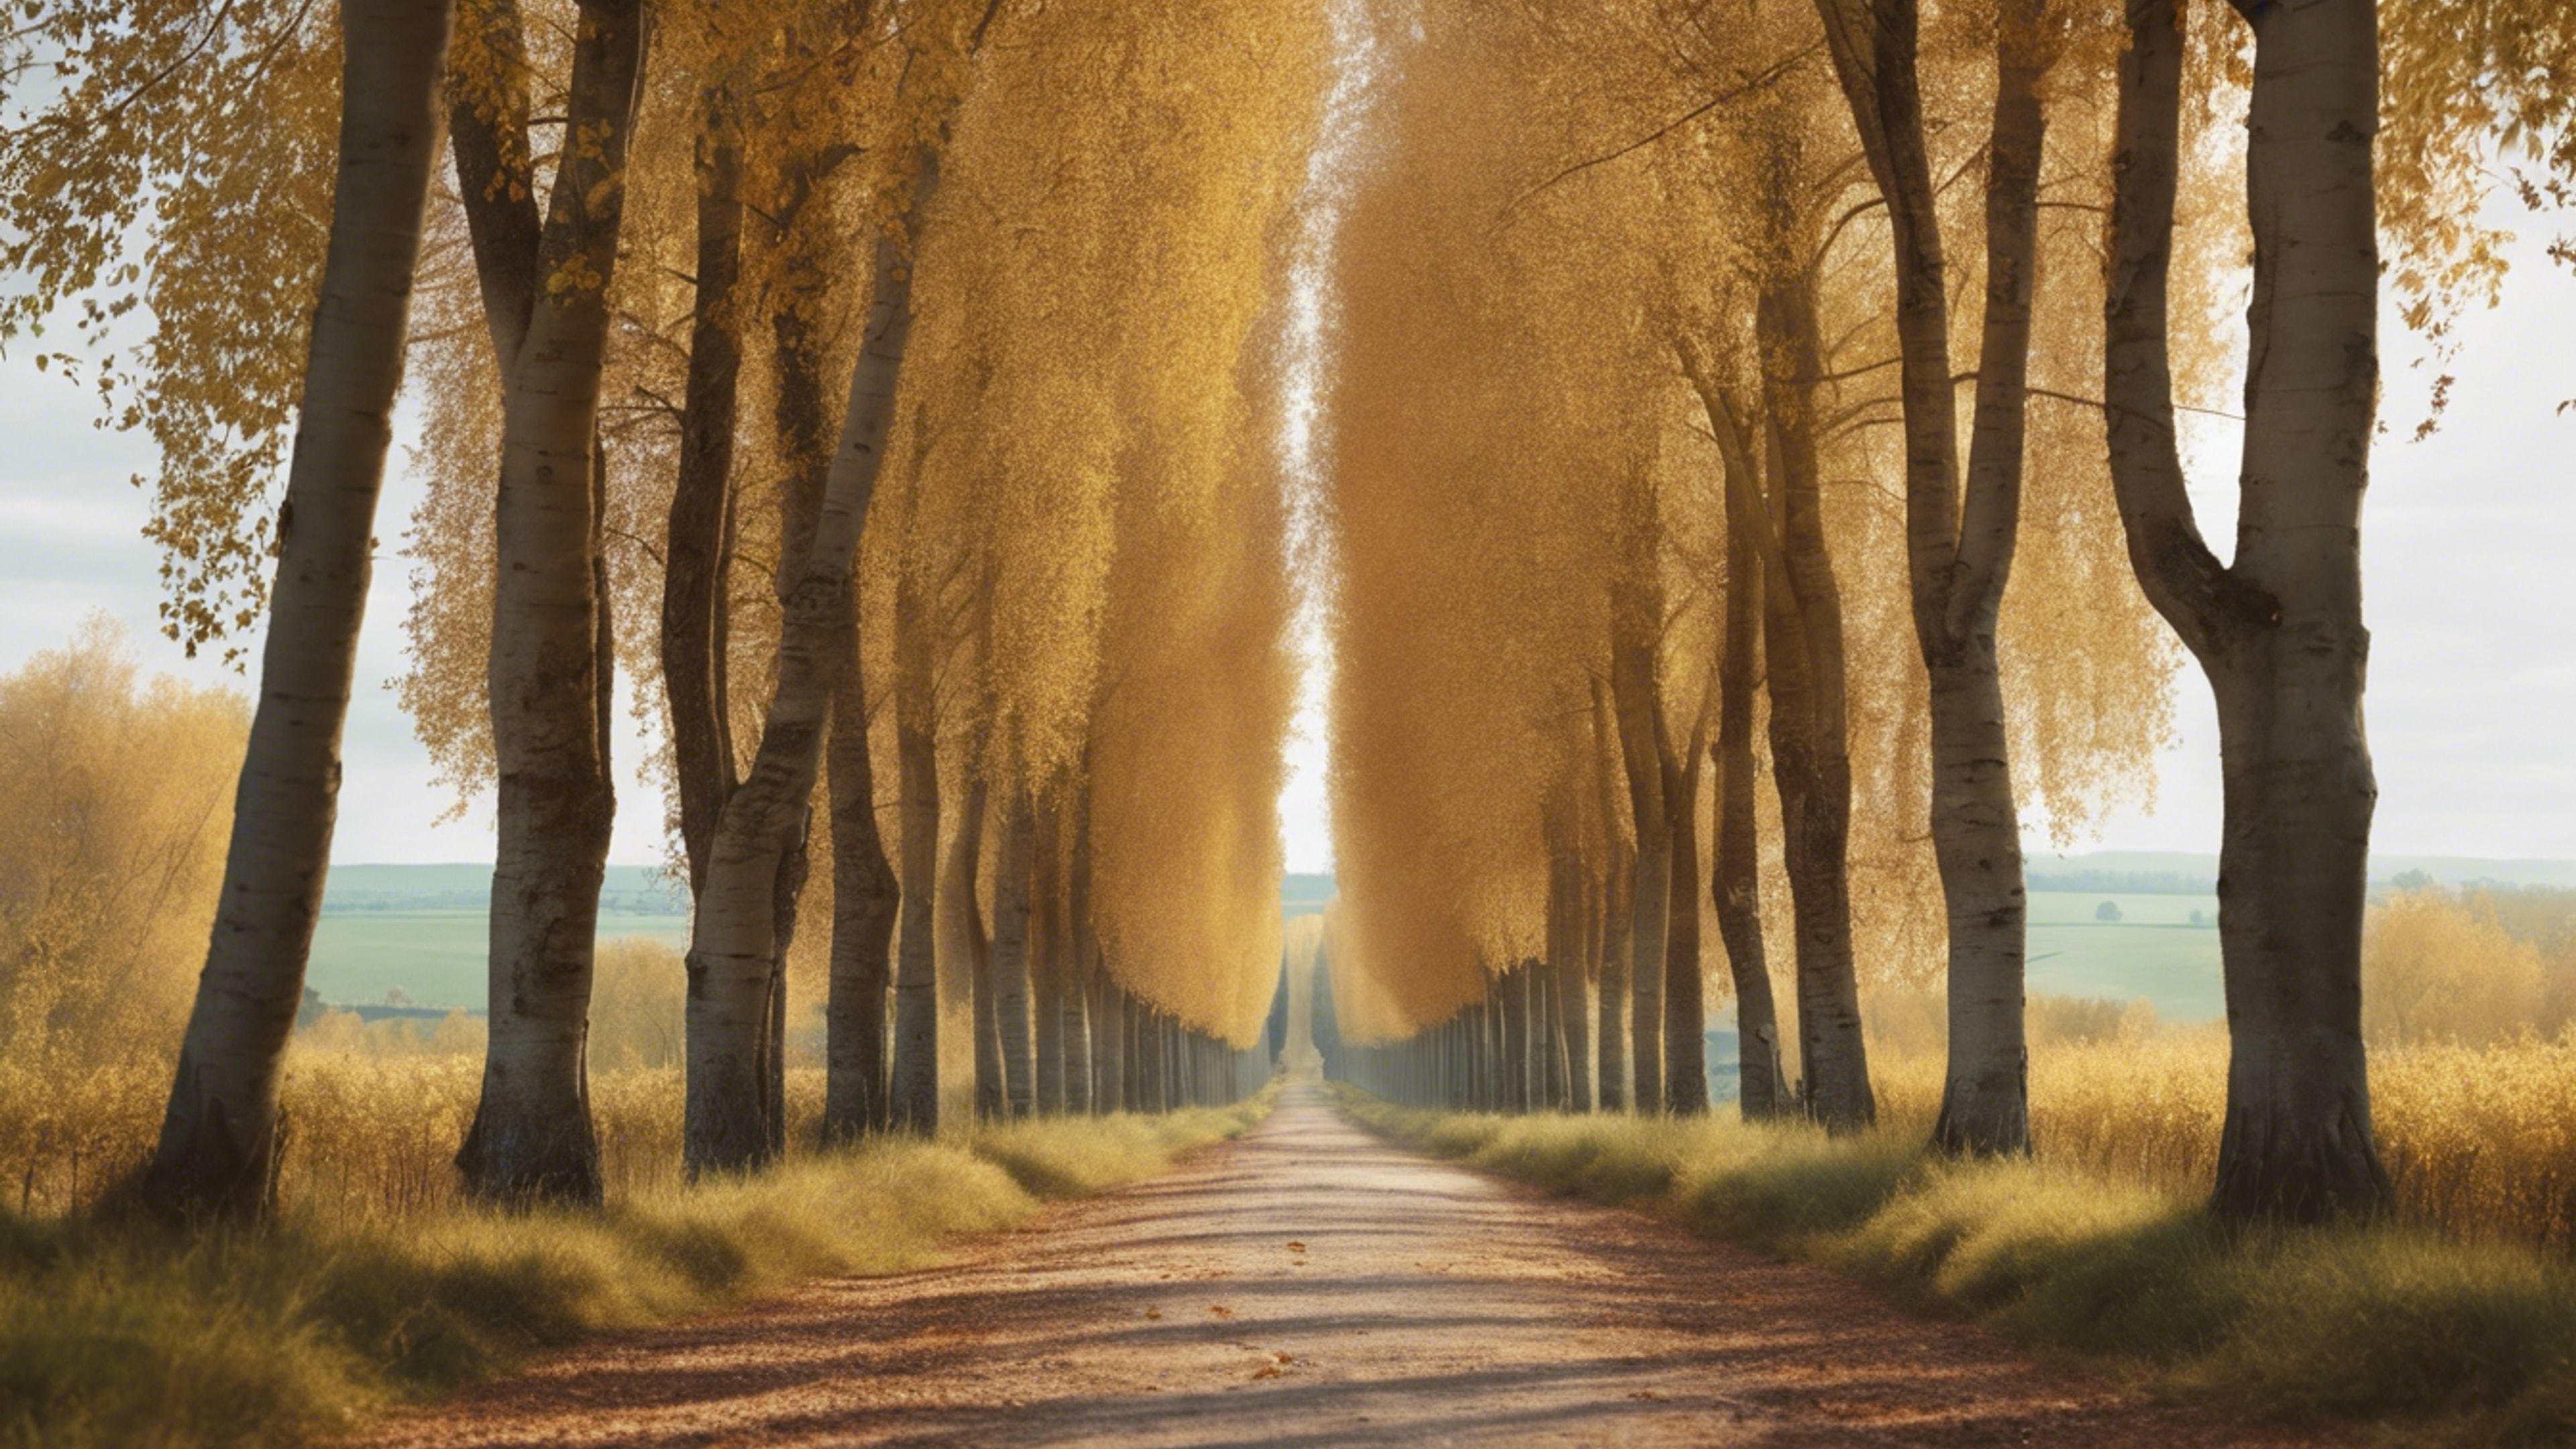 A peaceful French country lane lined with tall, mature poplar trees in autumn. Papel de parede[76d1ad7093004c7494eb]